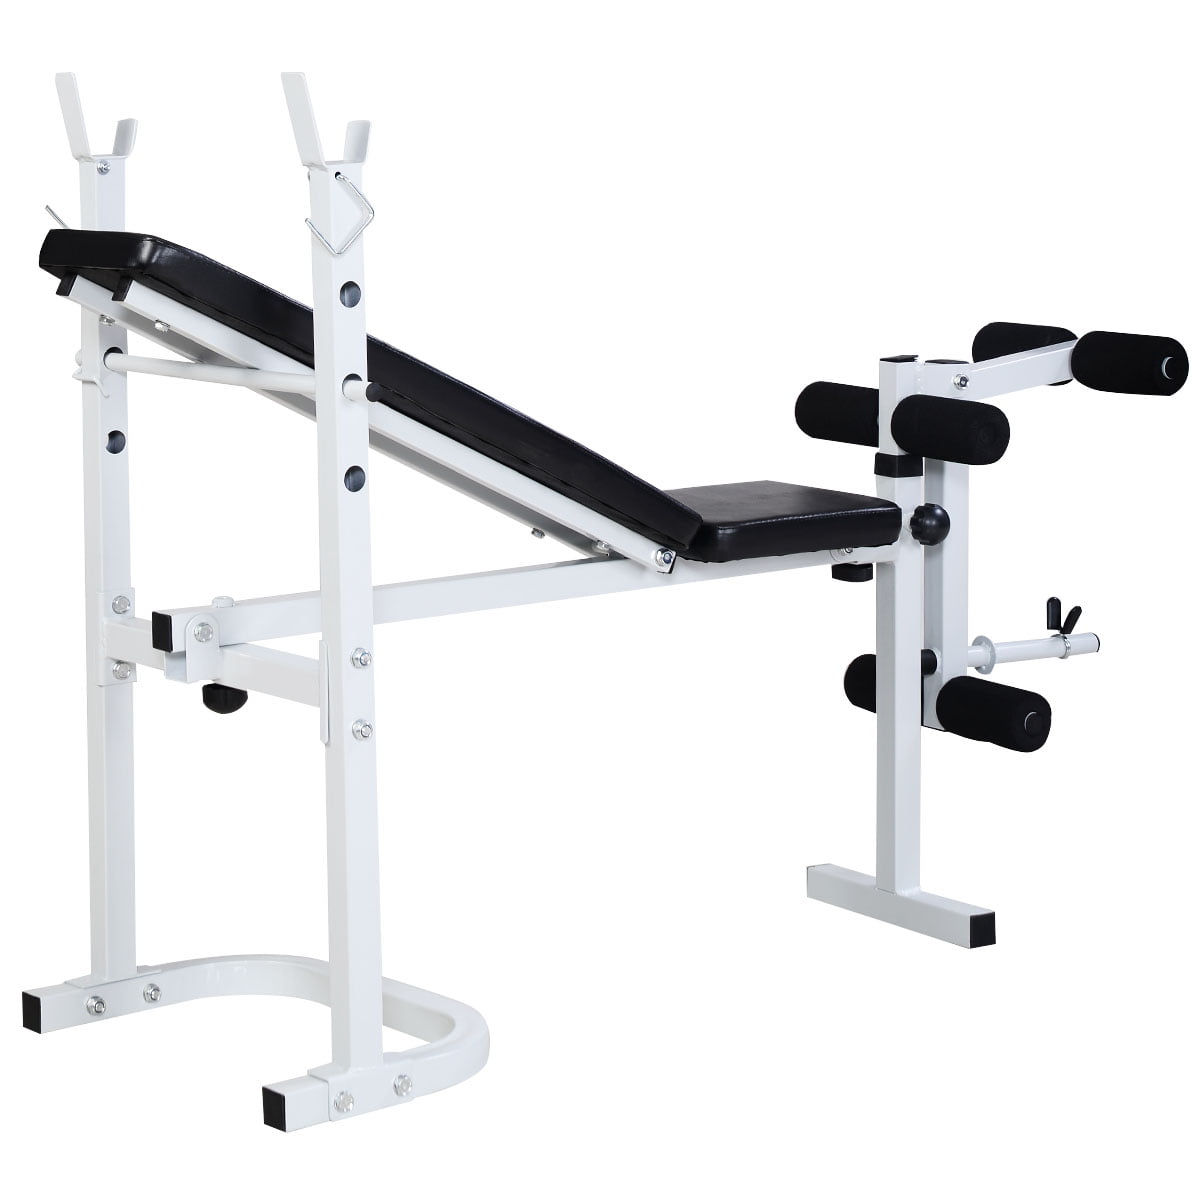  Workout Bench Walmart Canada for Gym